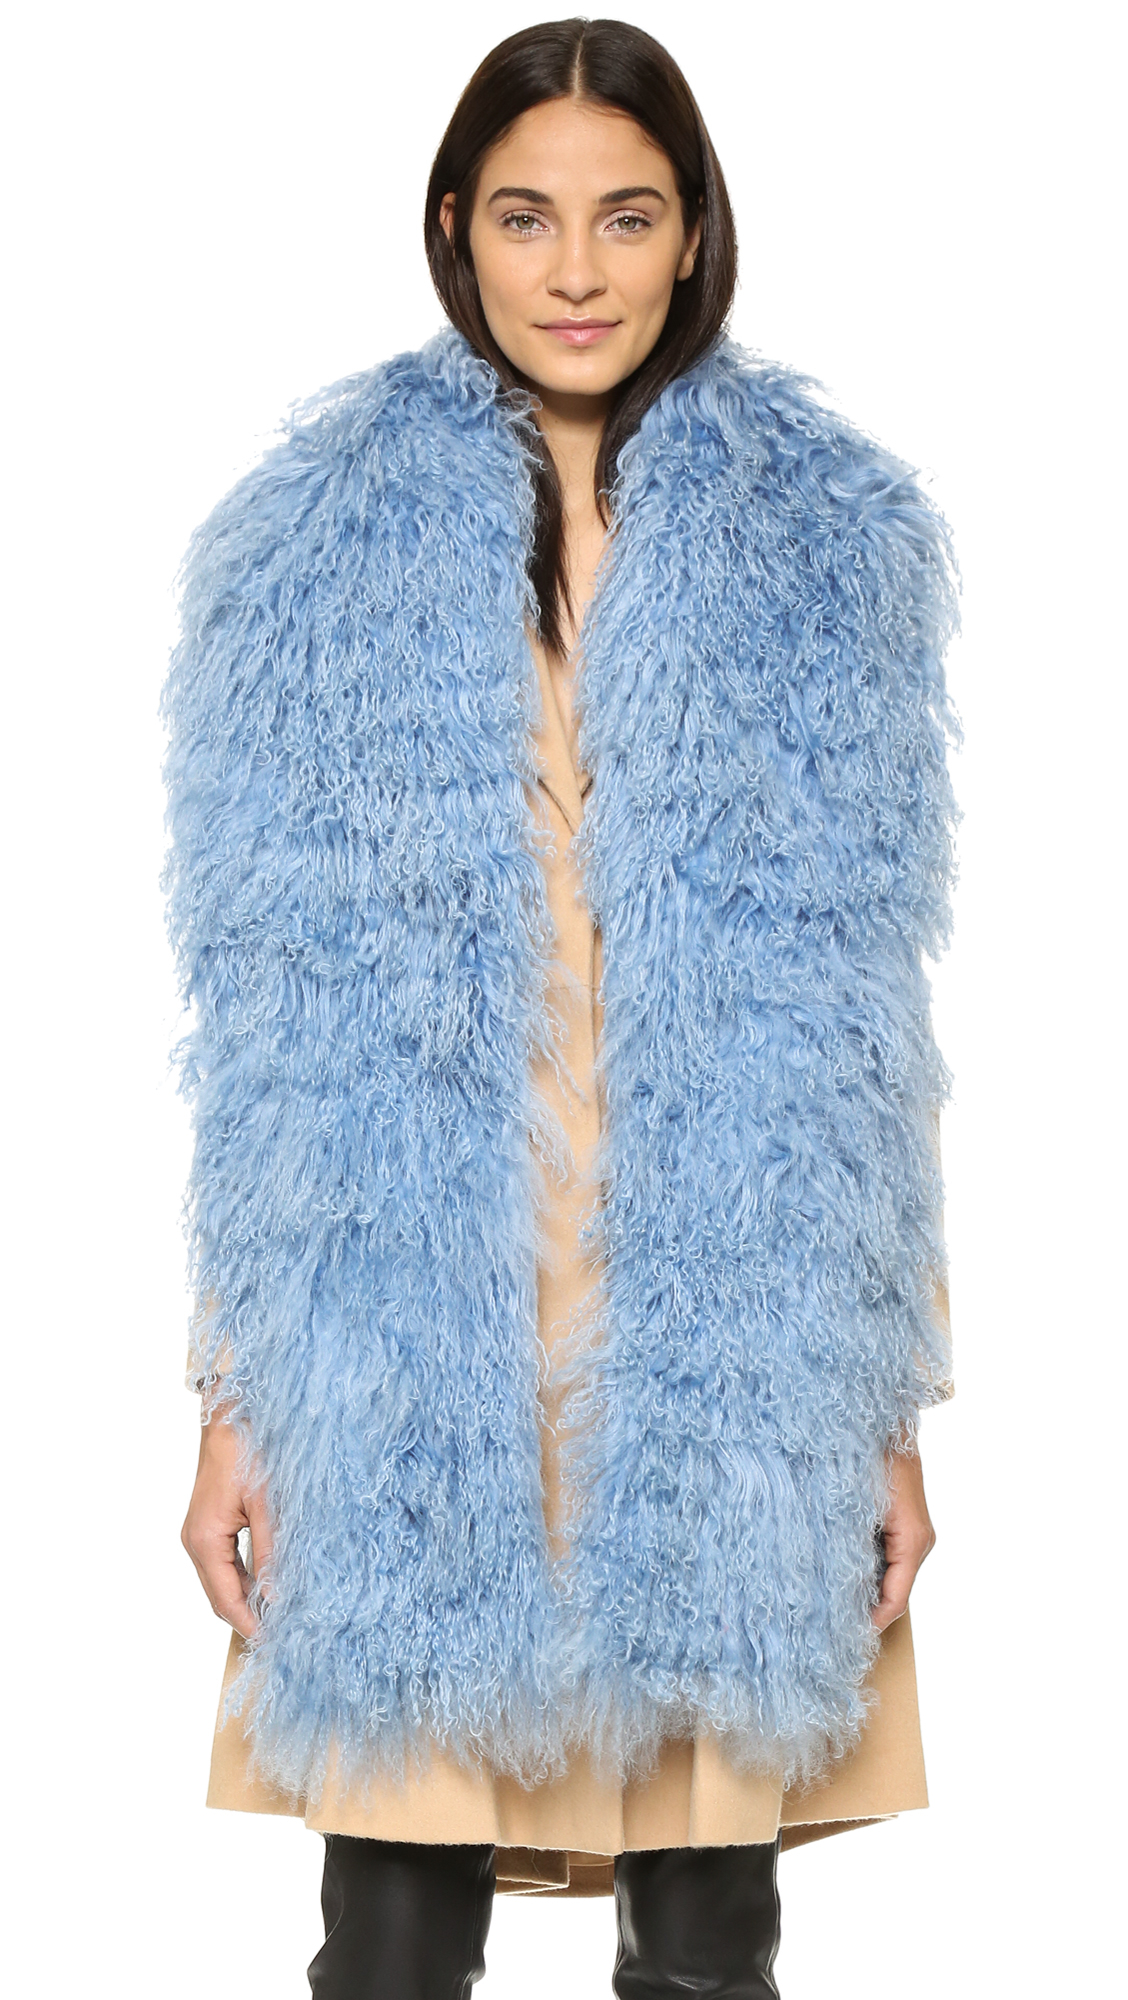 Lyst - Charlotte Simone Candy Floss Wrap Scarf in Blue